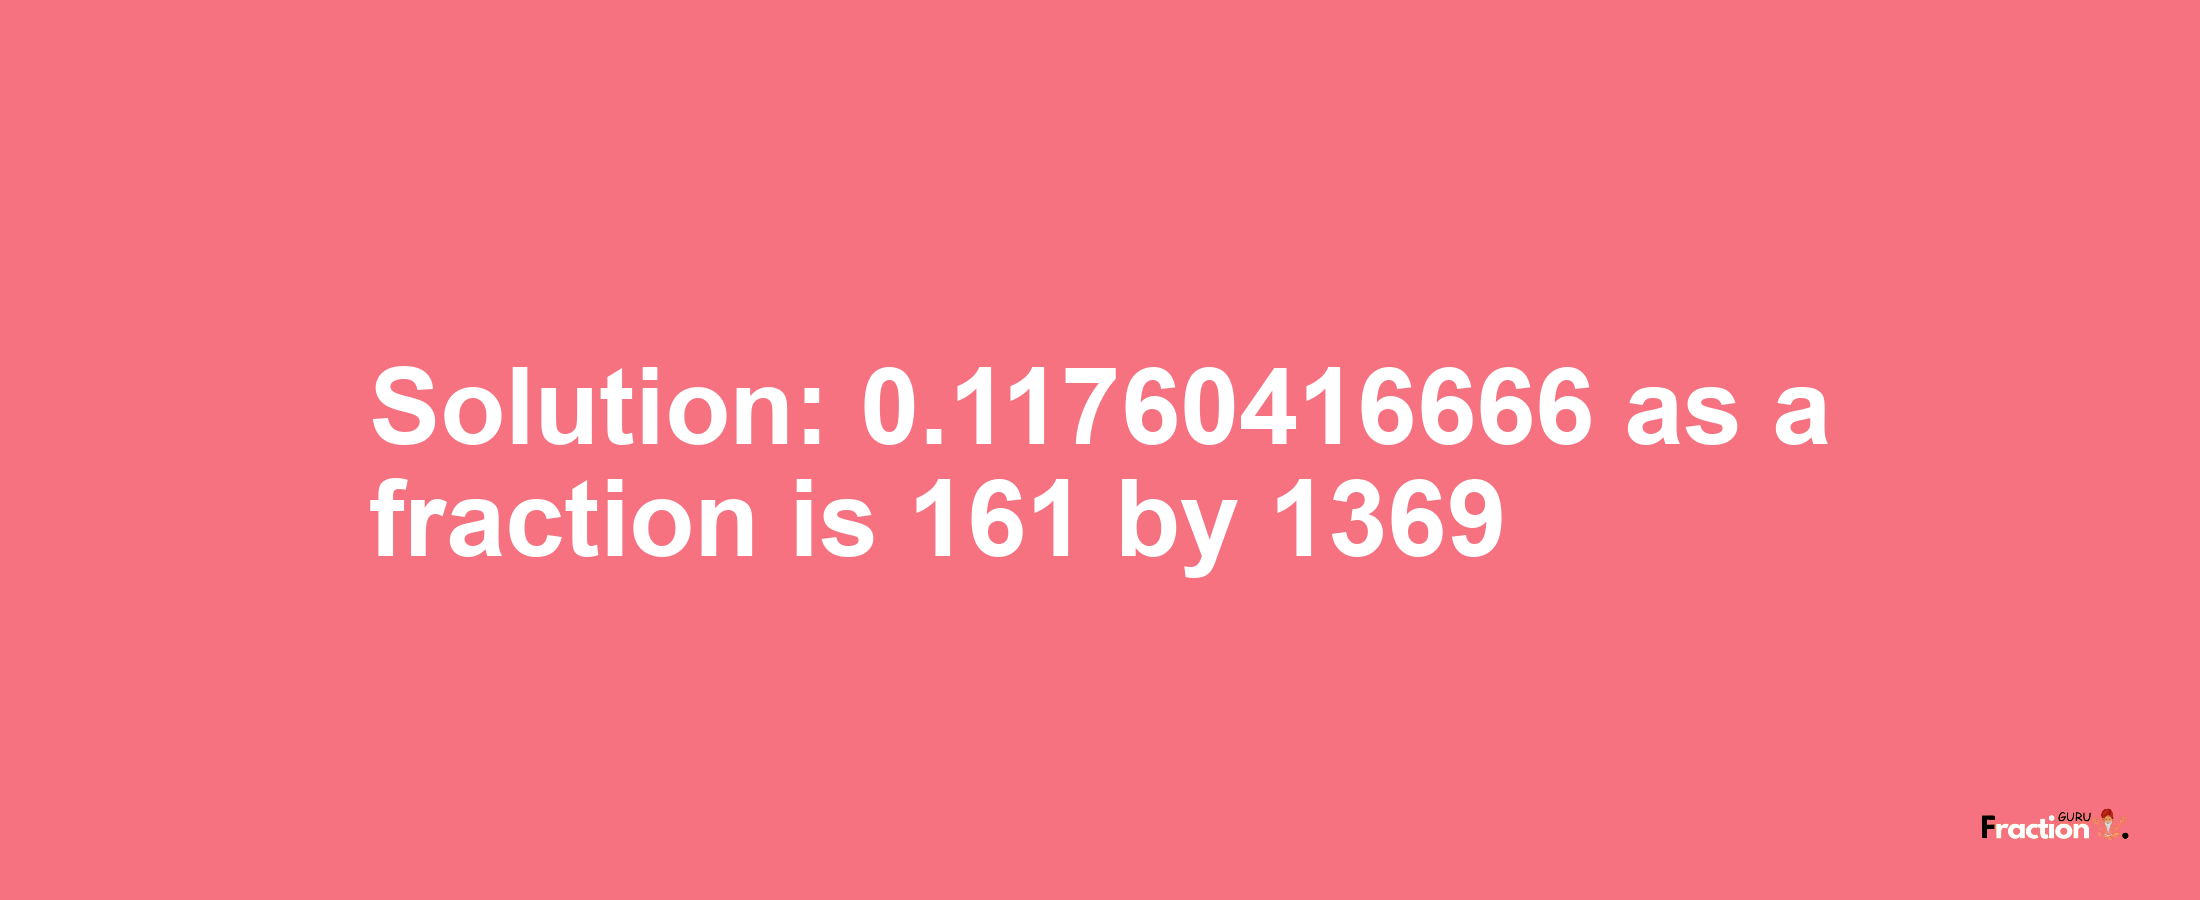 Solution:0.11760416666 as a fraction is 161/1369